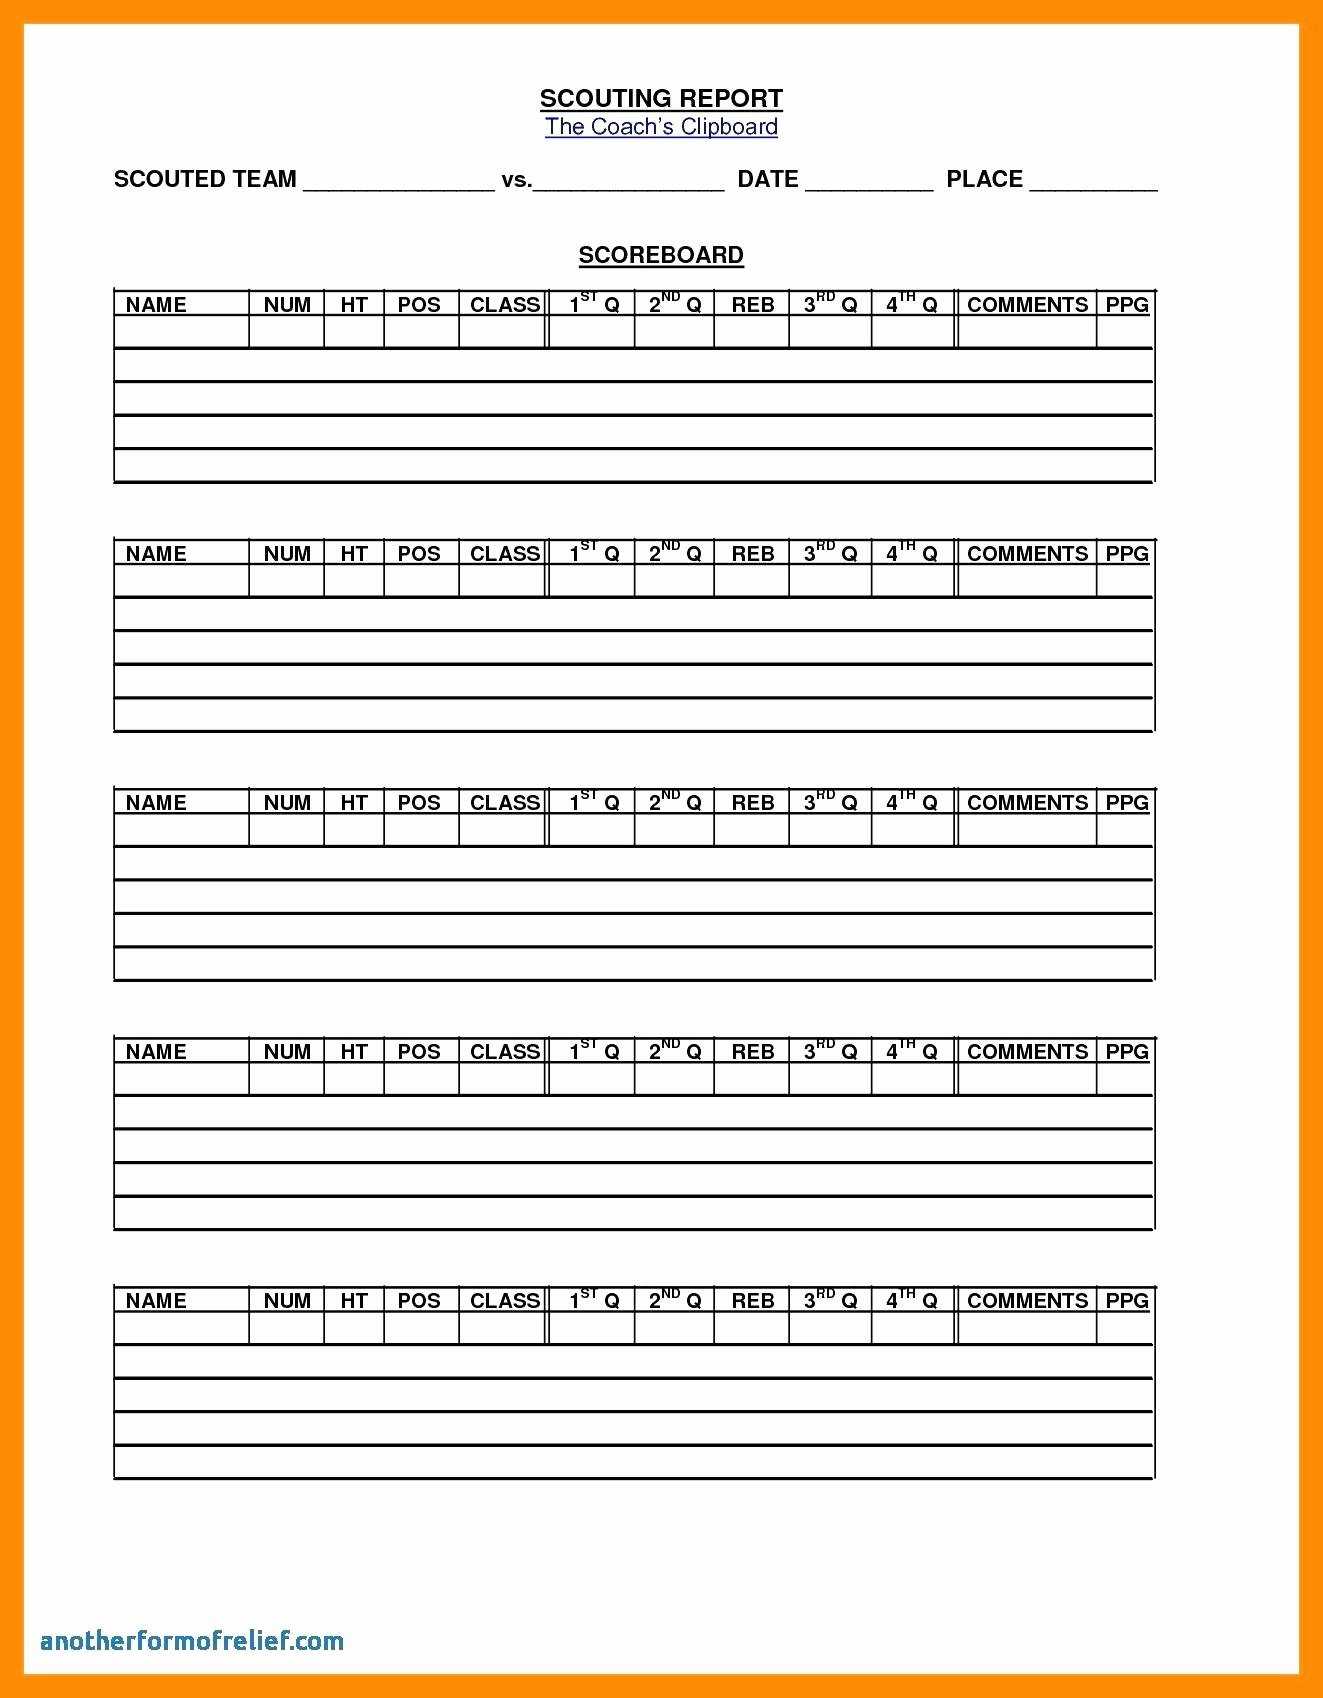 Free Baseball Stats Spreadsheet Excel Stat Sheet Blank In Baseball Scouting Report Template